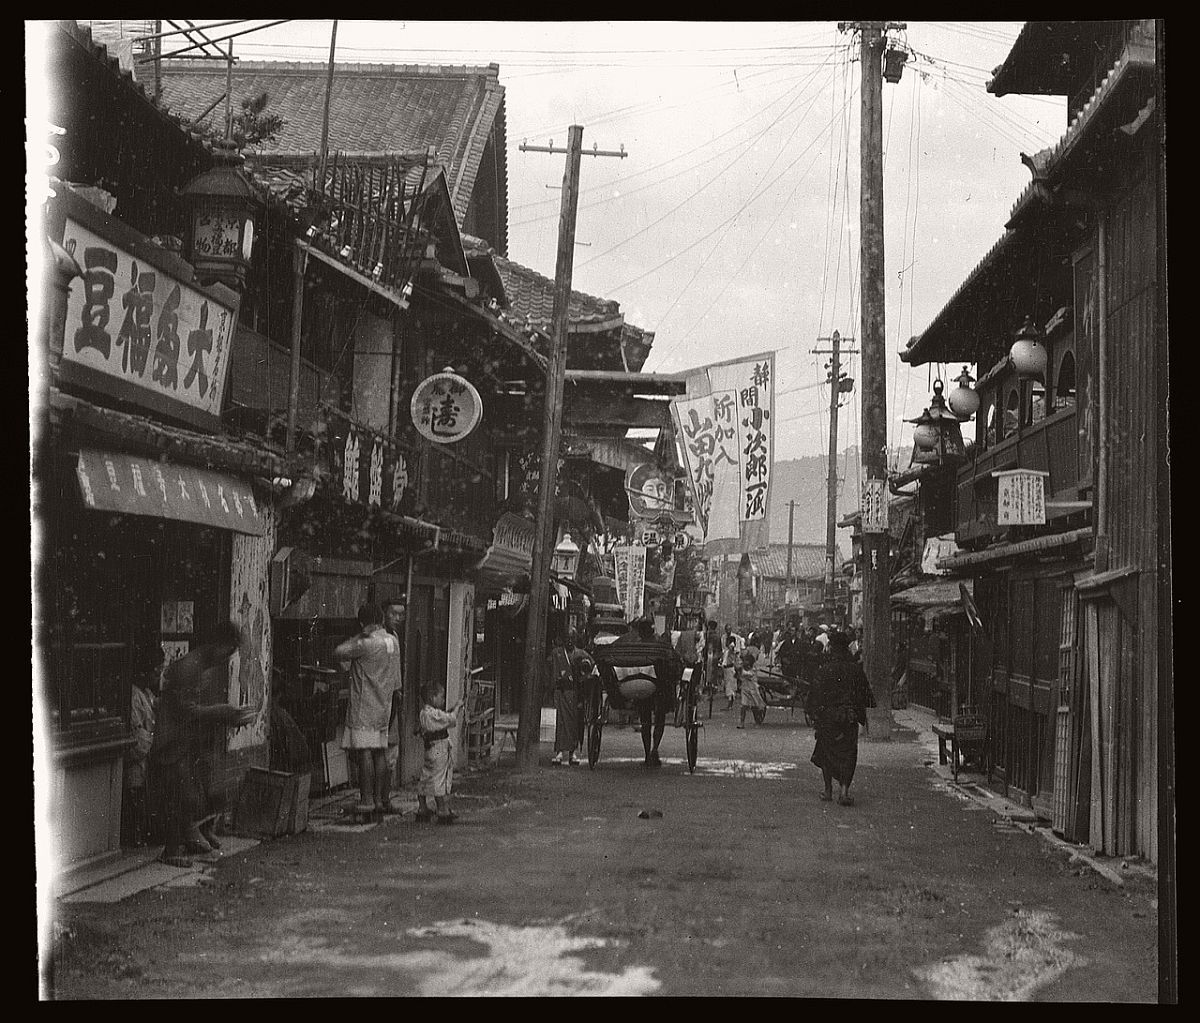 Japan Daily Life by Arnold Genthe (1908) 